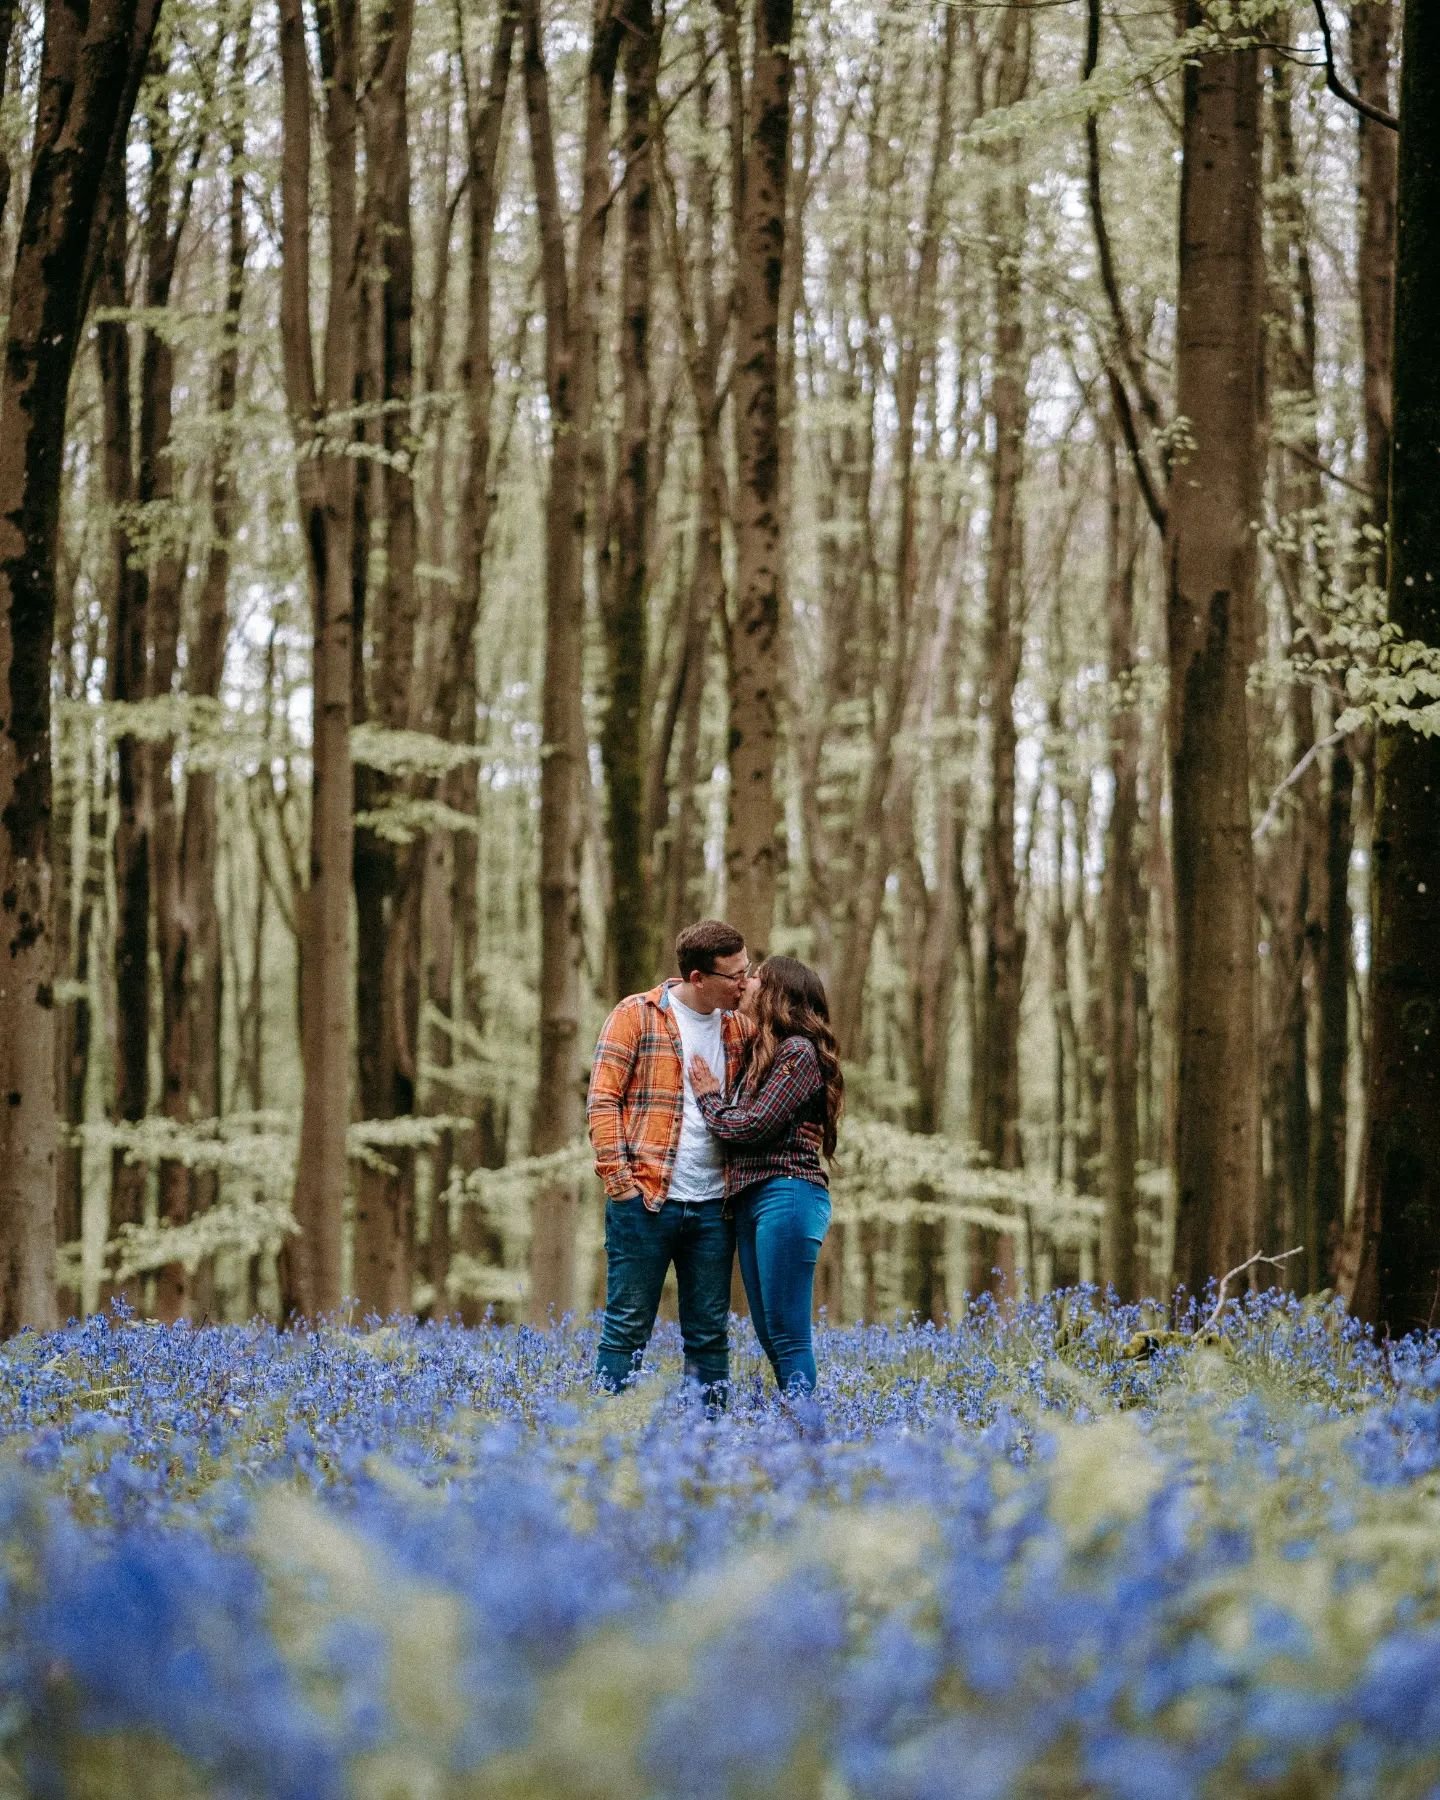 Bluebells as far as the eyes can see! Lovely engagement shoot yesterday with this wonderful couple!